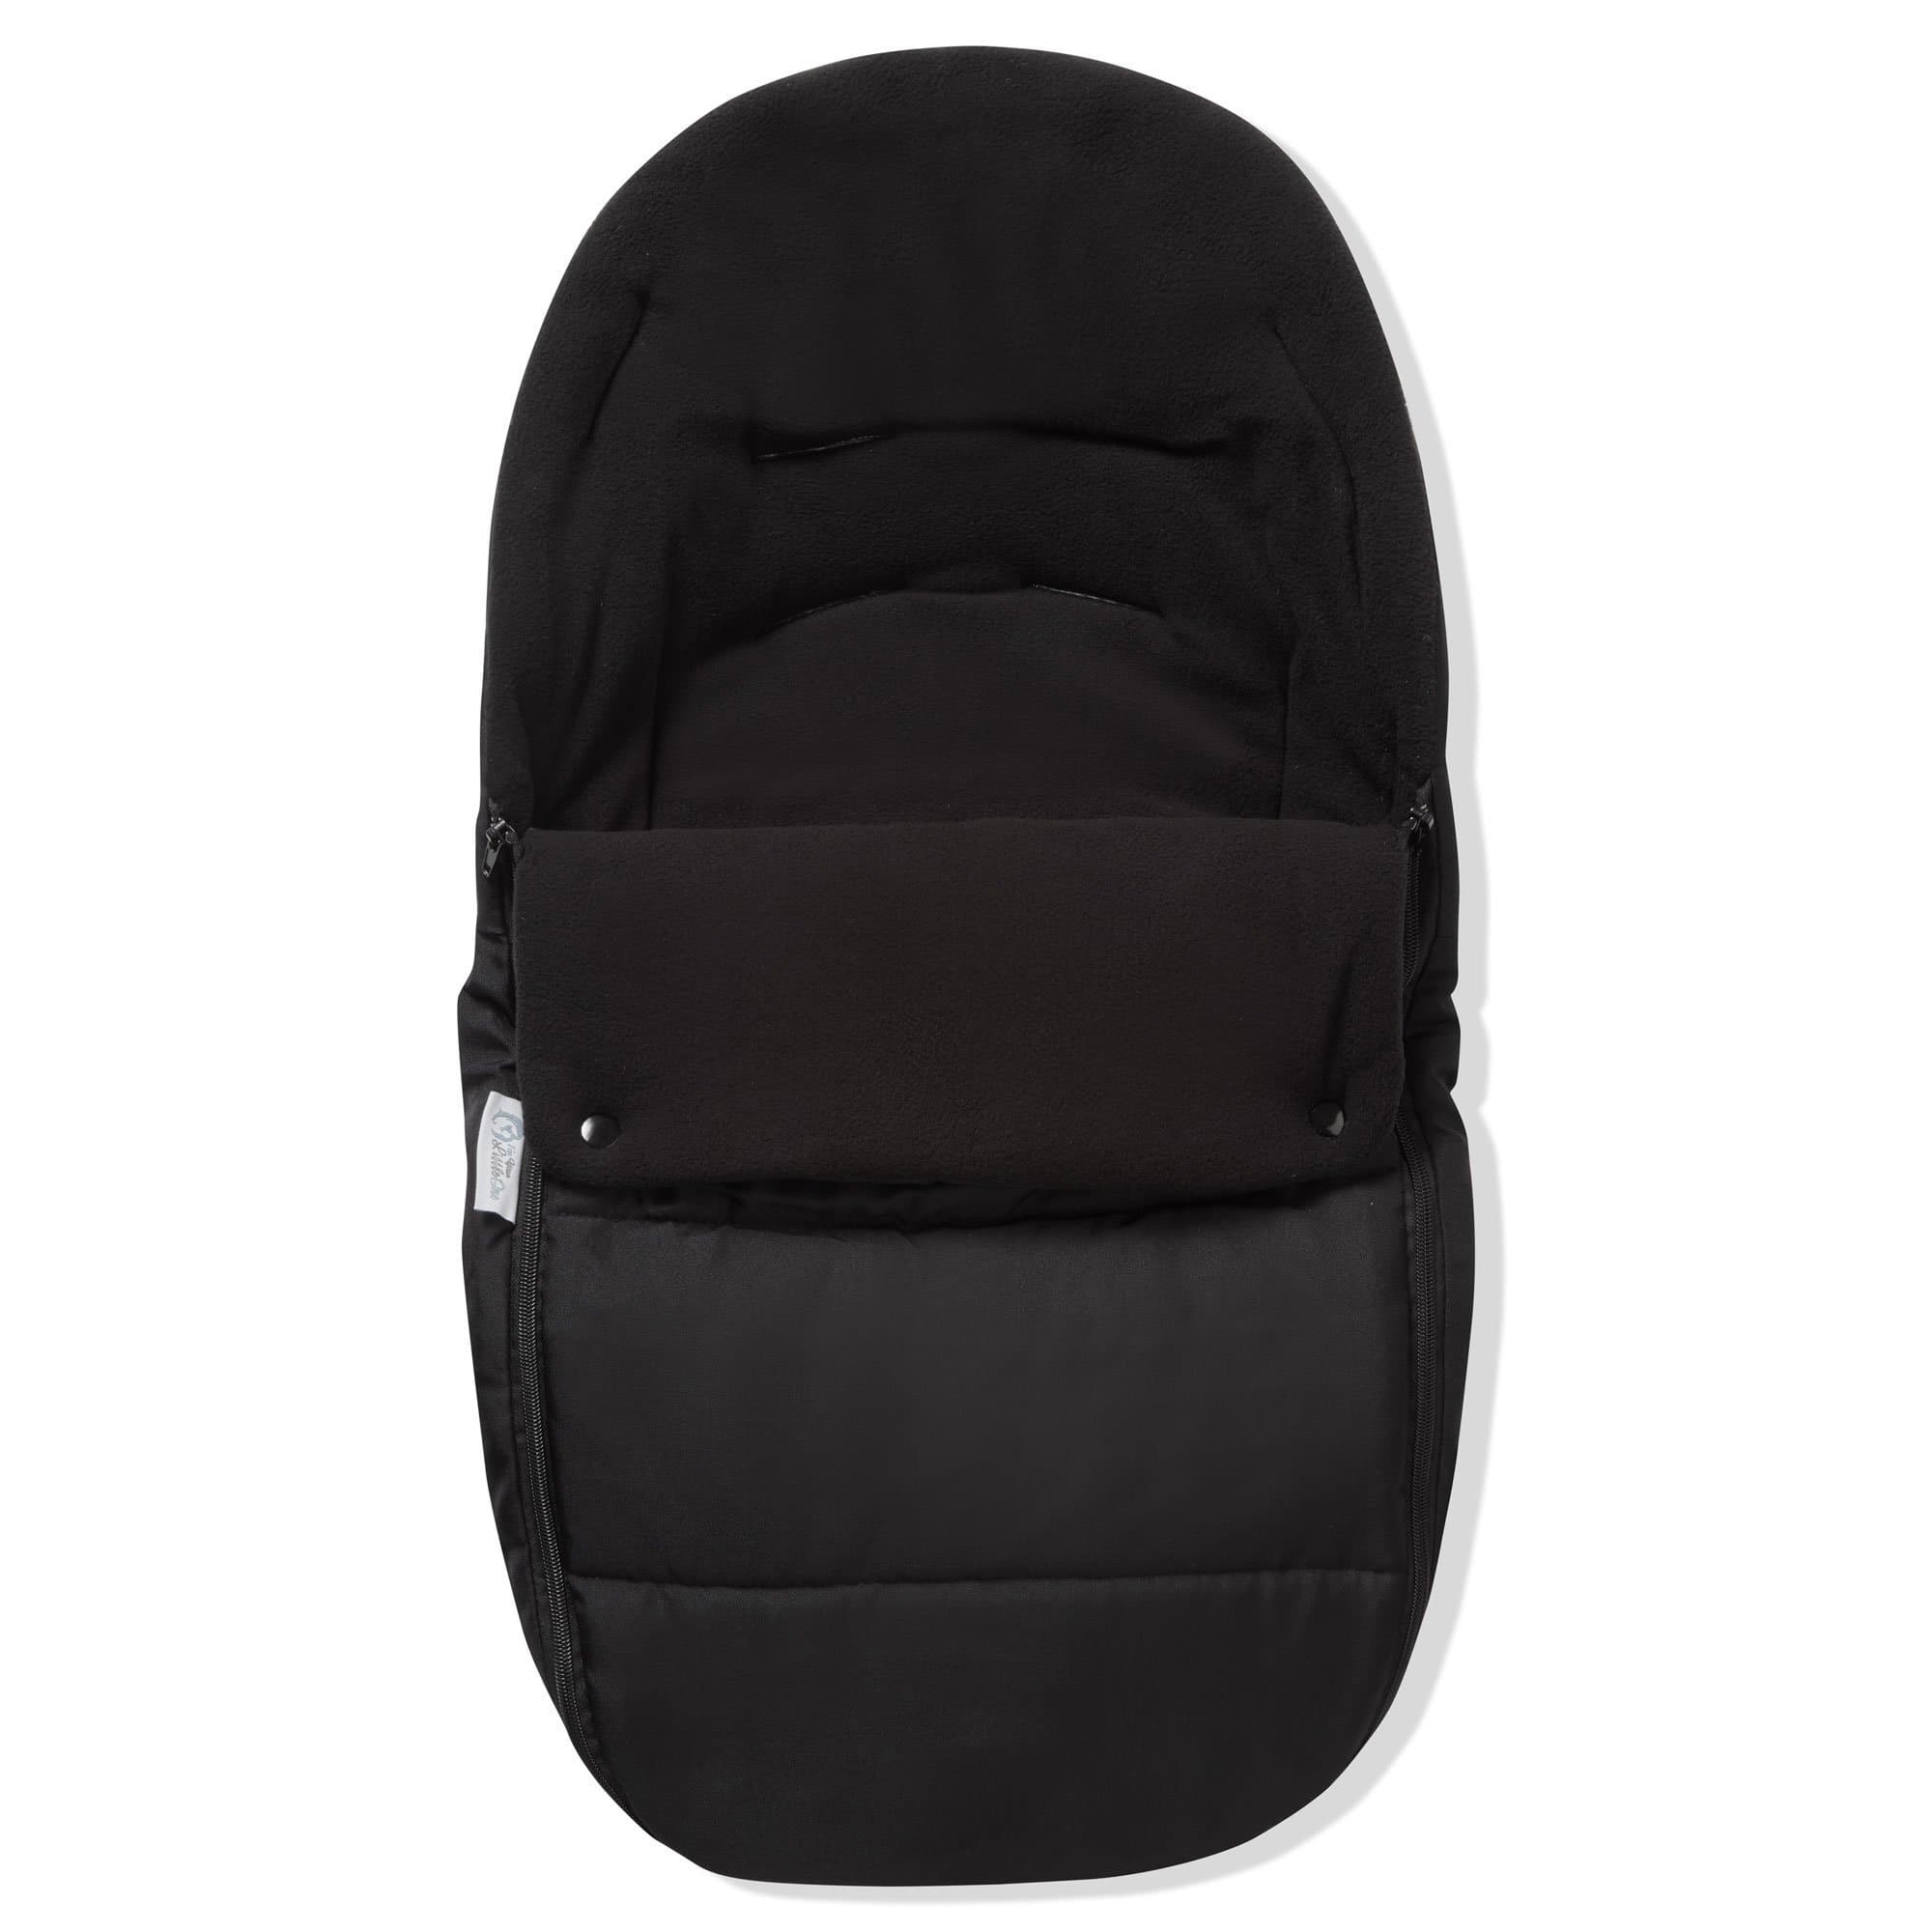 Premium Car Seat Footmuff / Cosy Toes Compatible with Nuna - Black Jack / Fits All Models | For Your Little One